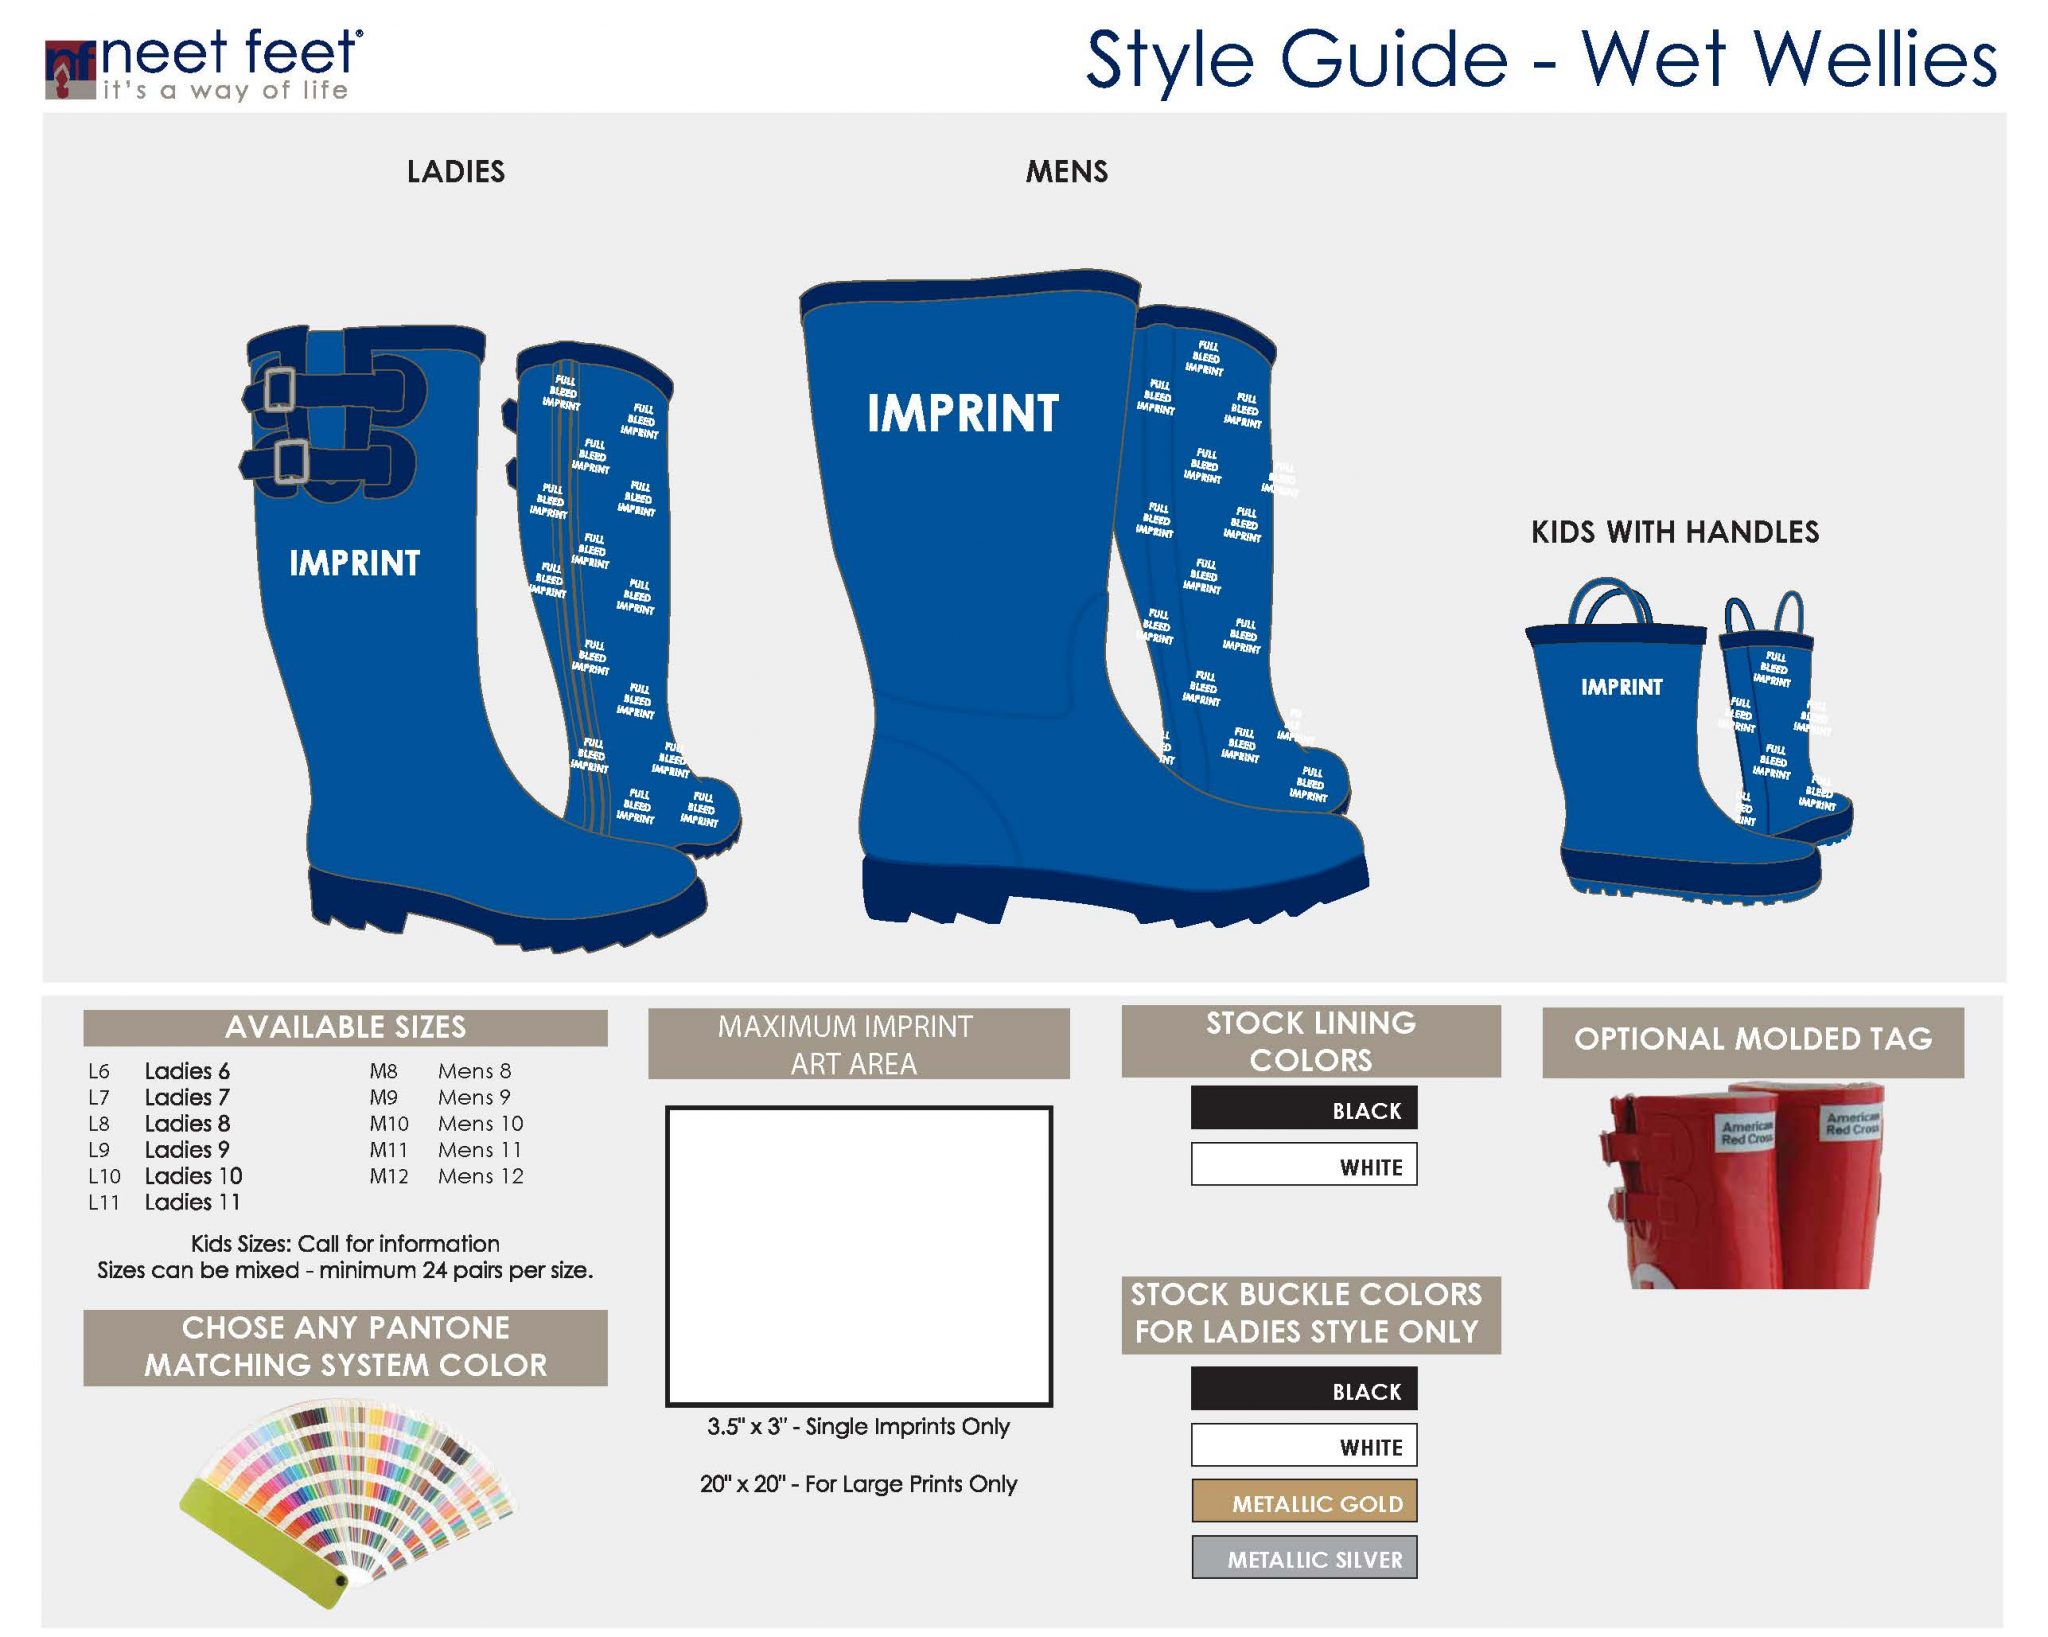 Wet Wellies Style Guide